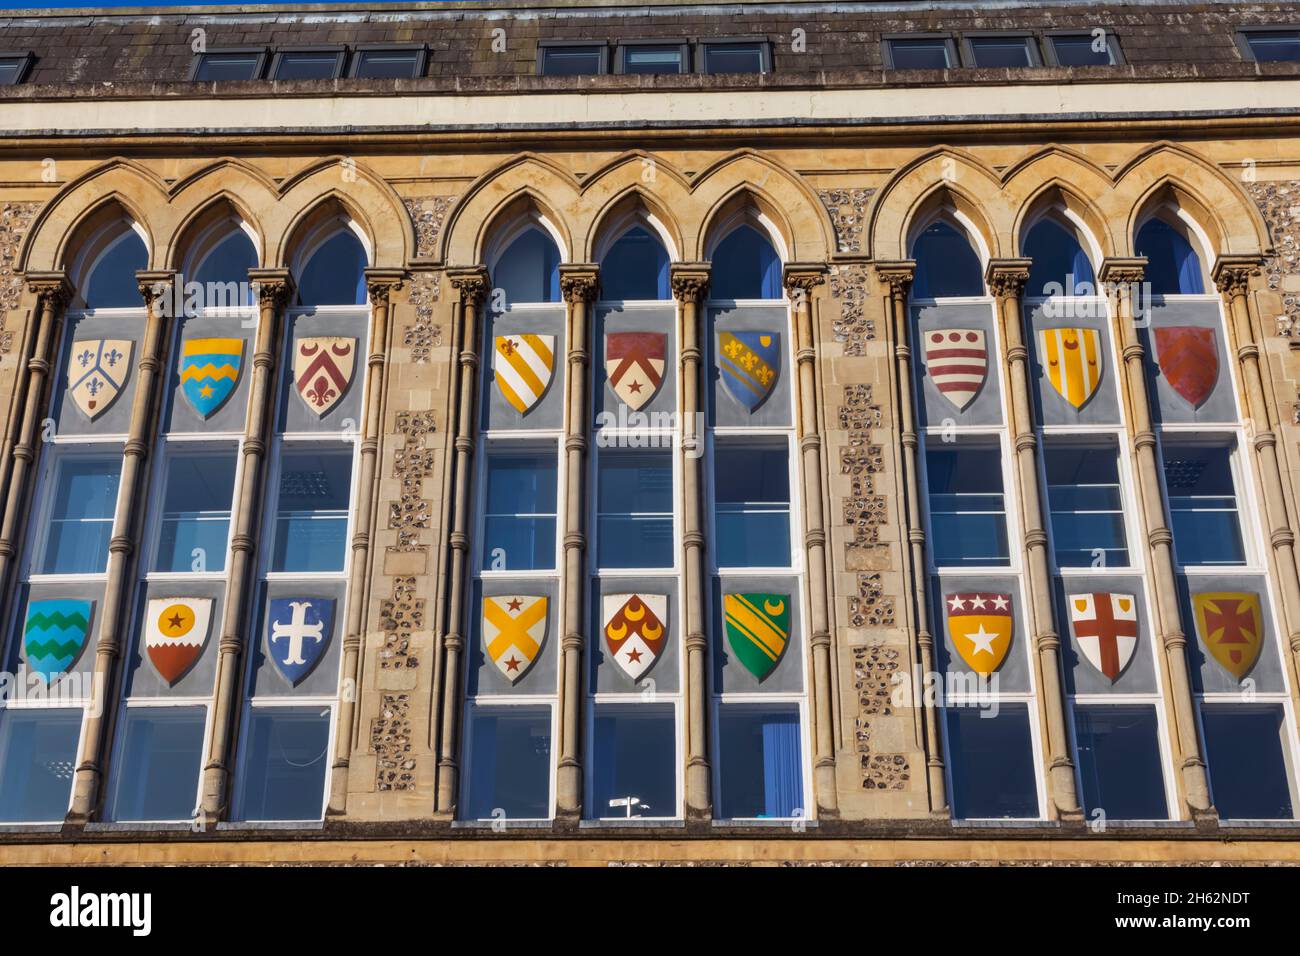 england, hampshire, winchester, The guildhall, Fenster mit Wappen Stockfoto